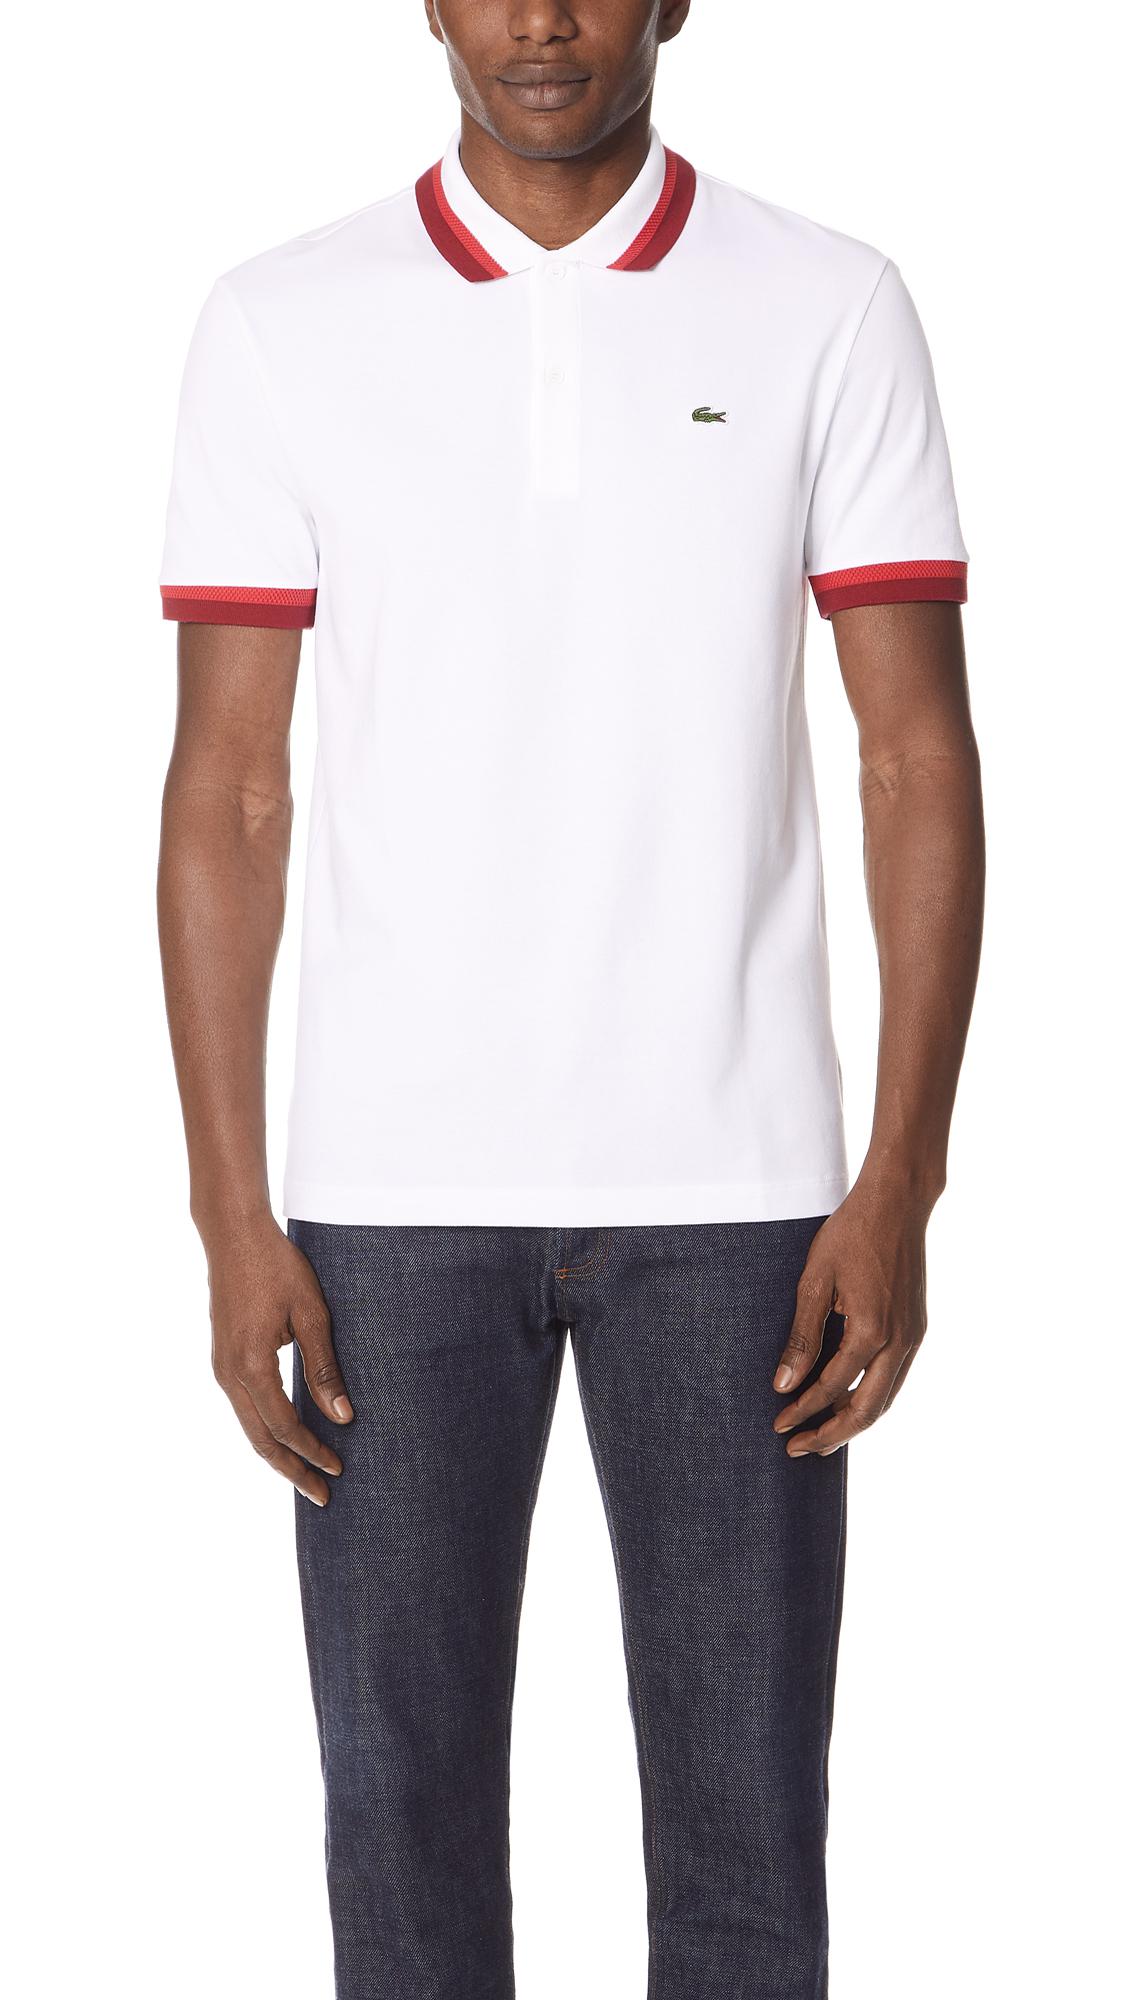 white and red lacoste shirt